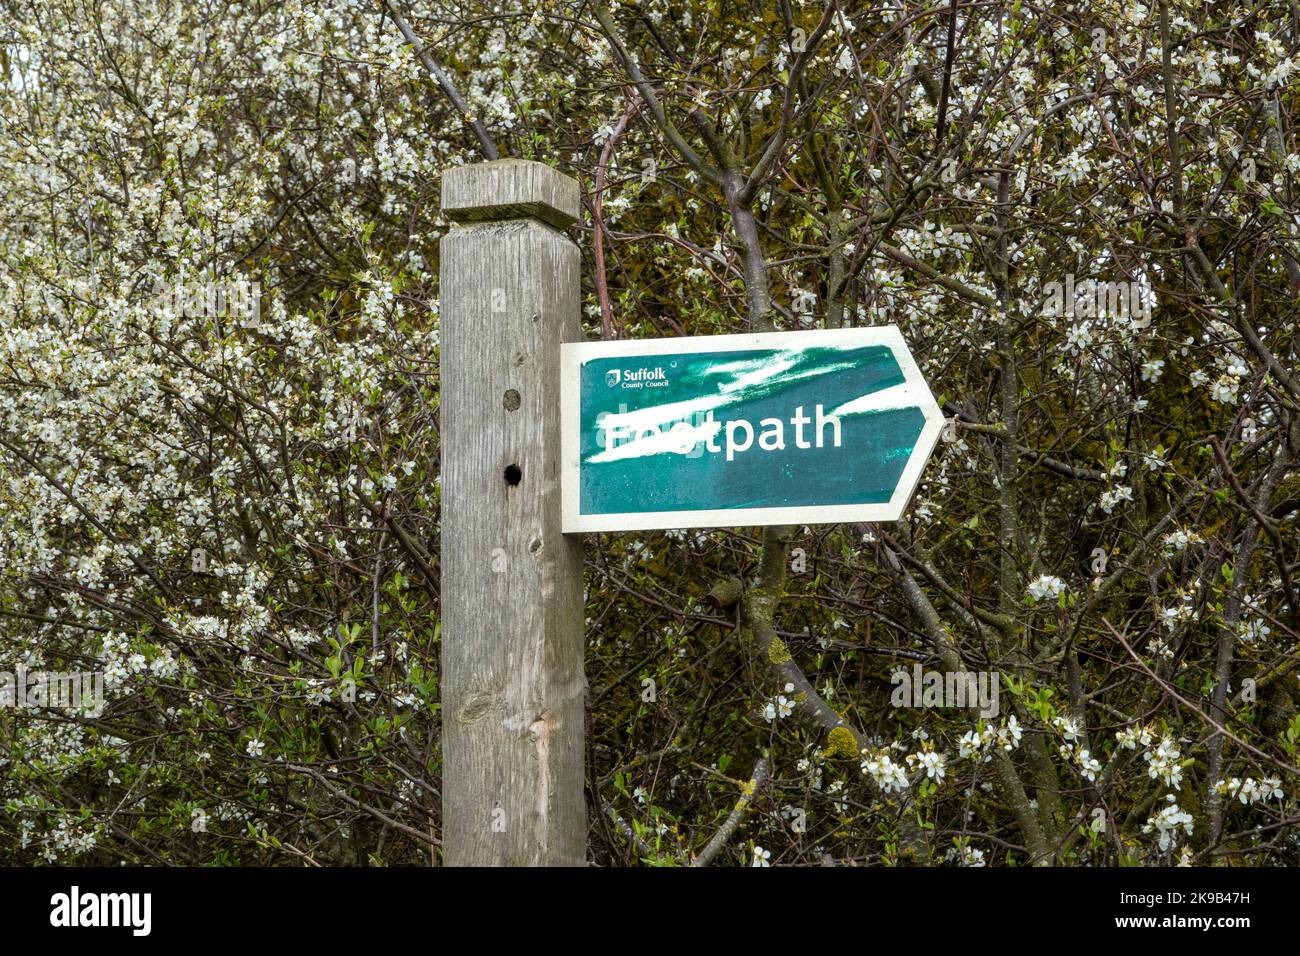 Directional arrow footpath sign heavily scratched pointing to the right mounted on a wooden post with a tree in blossom in the background Stock Photo